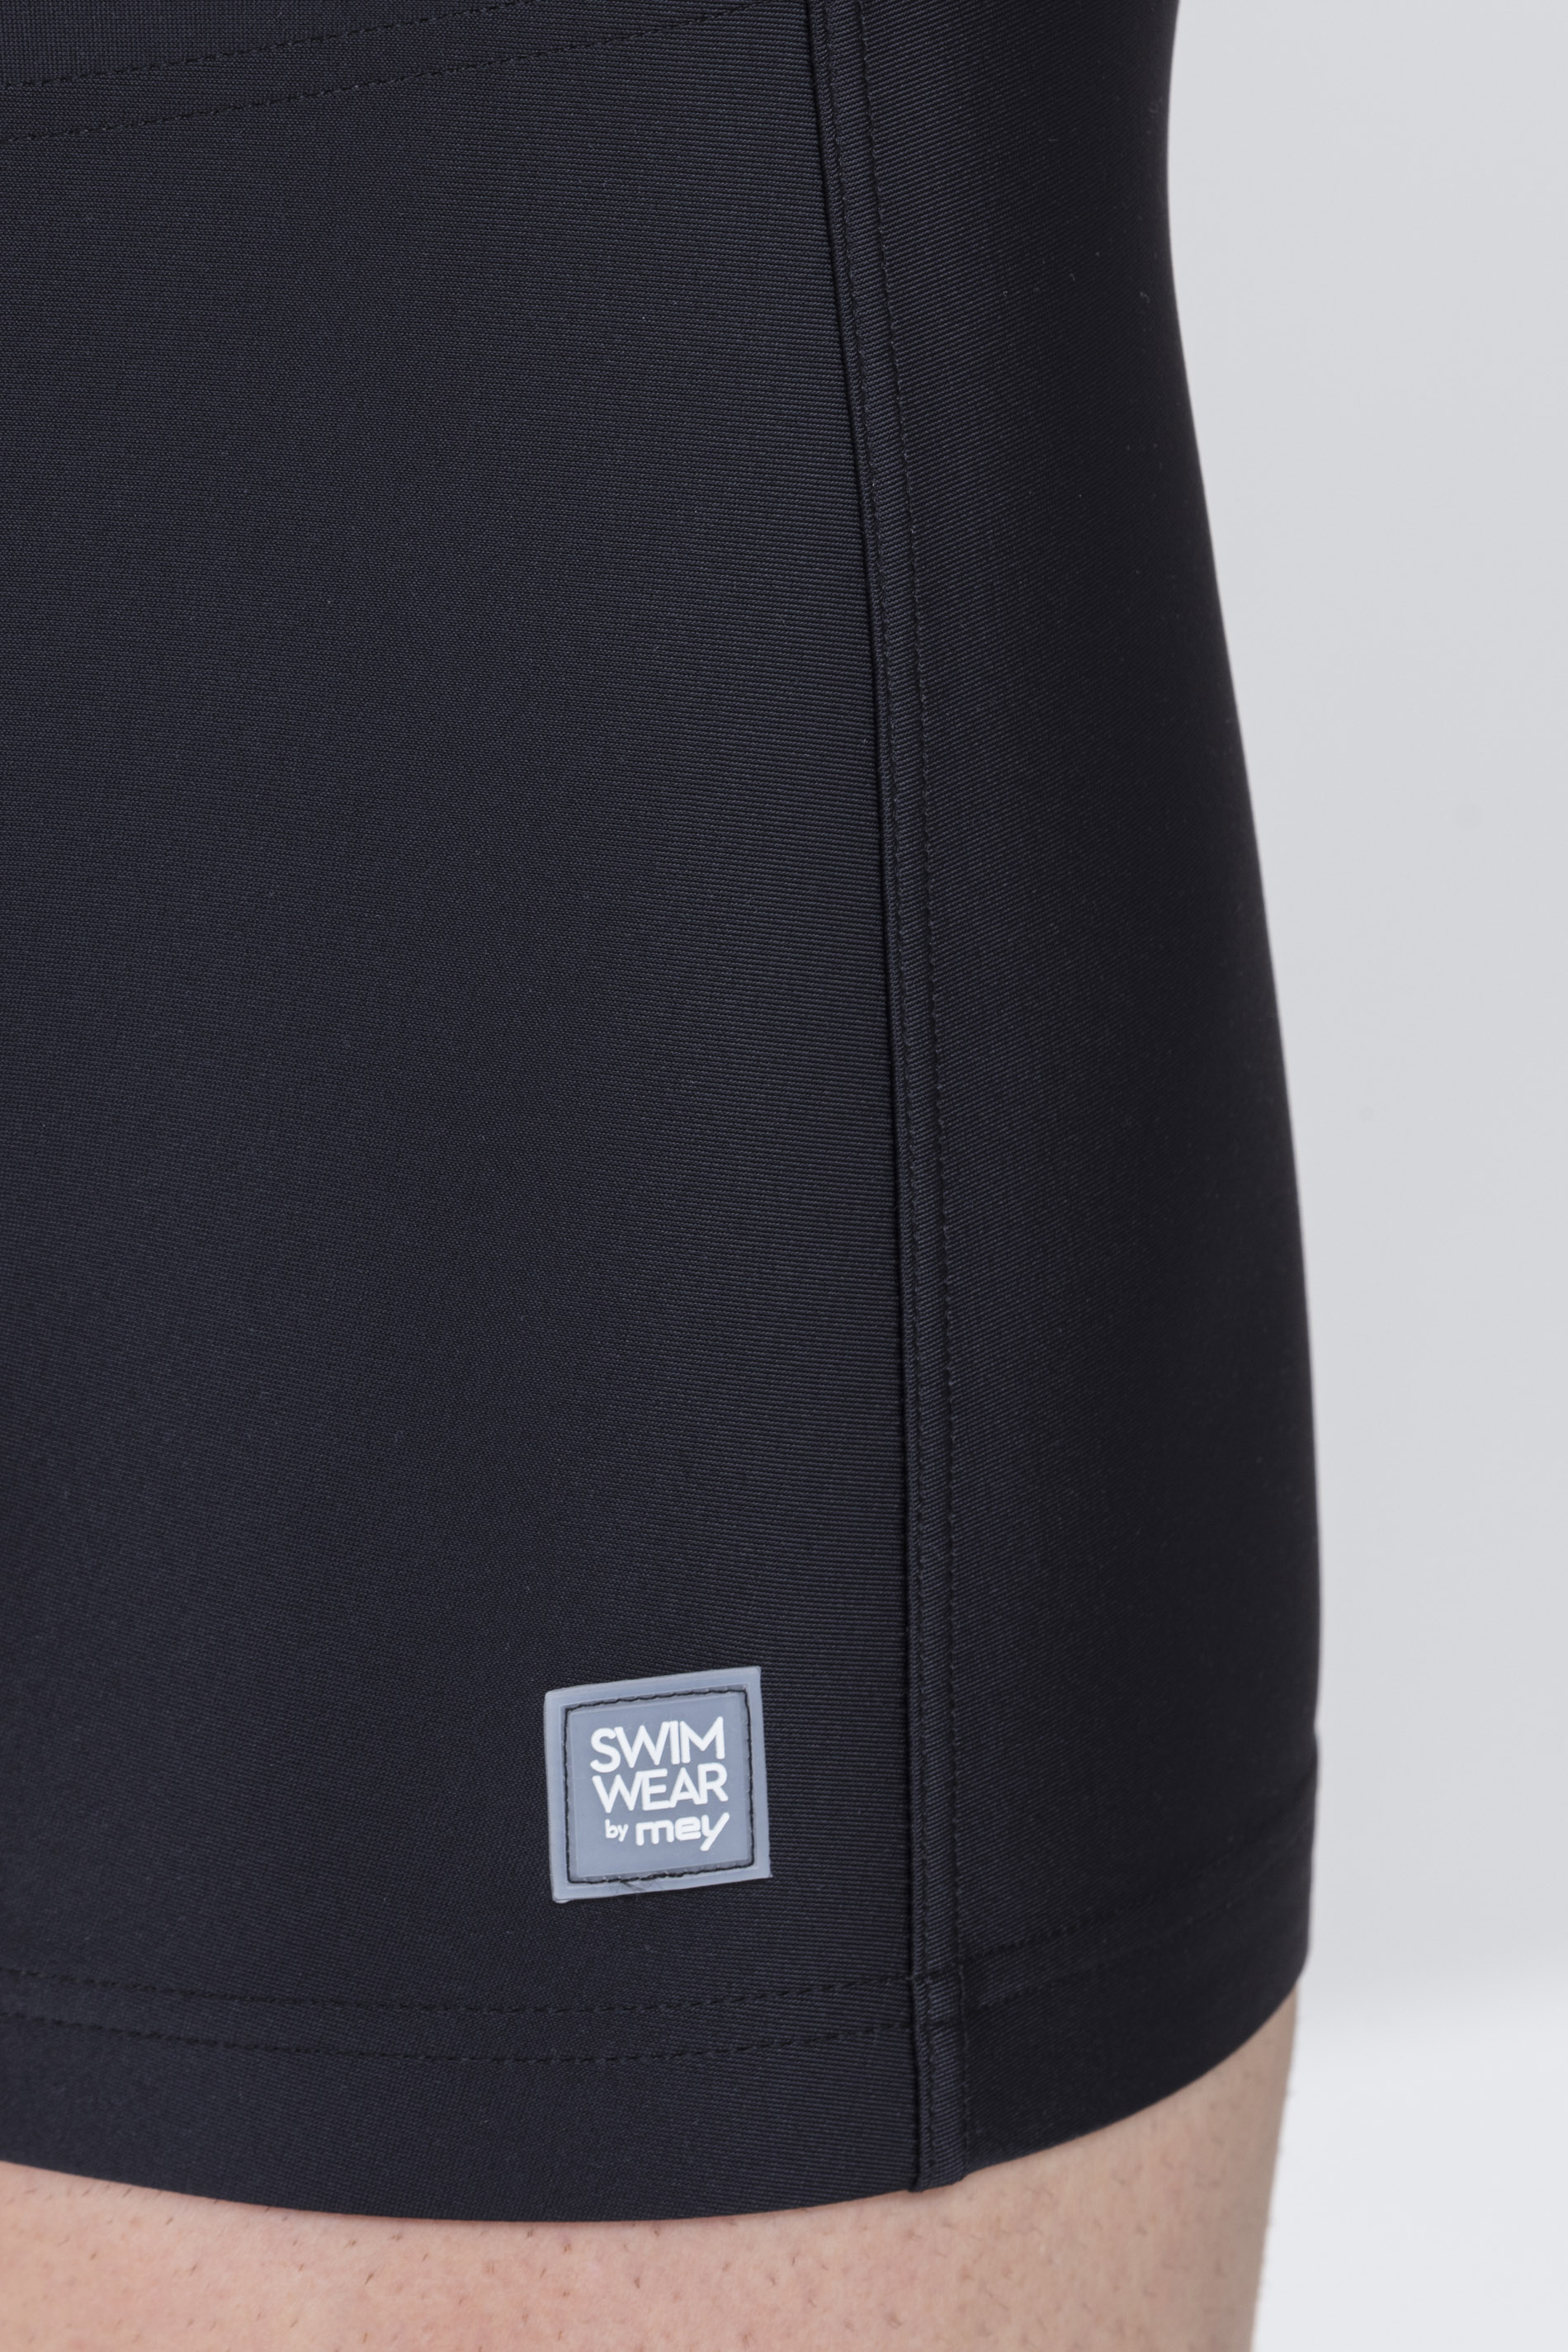 Bade Shorty Black Serie English Harbour  Detail View 01 | mey®